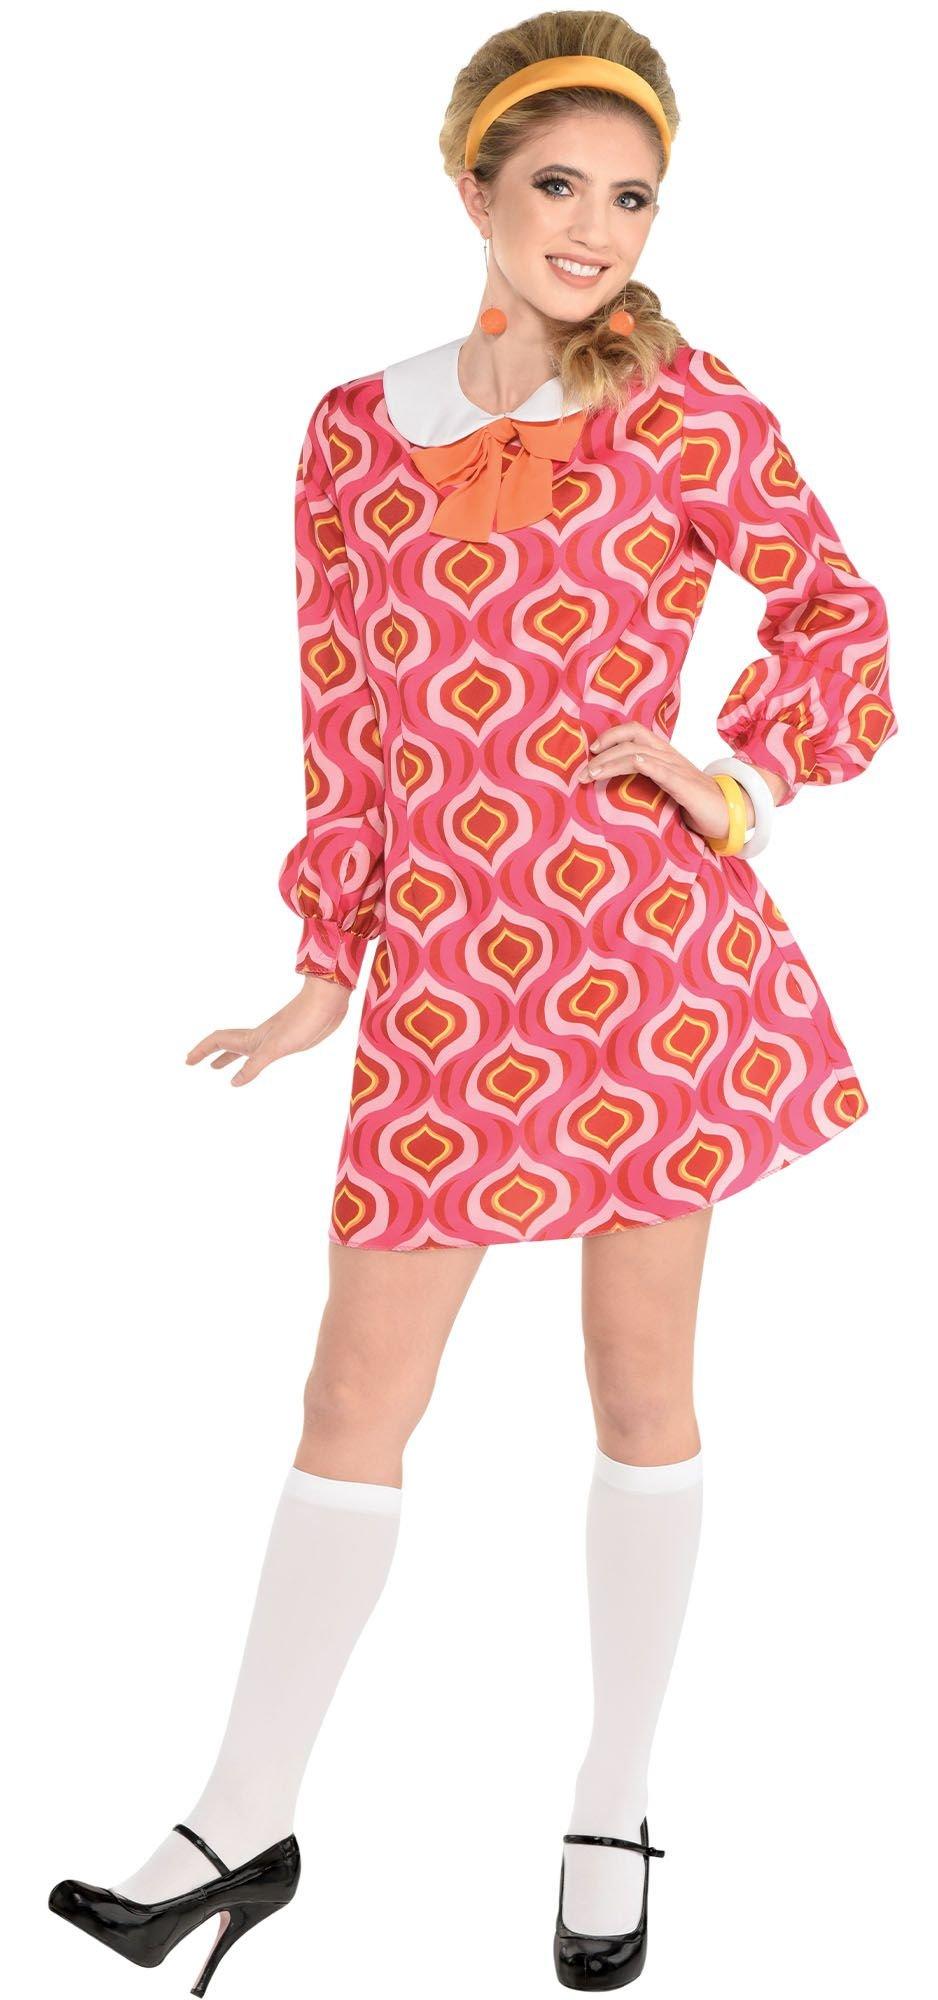 Pink & Orange 60s Mod Dress for Adults | Party City